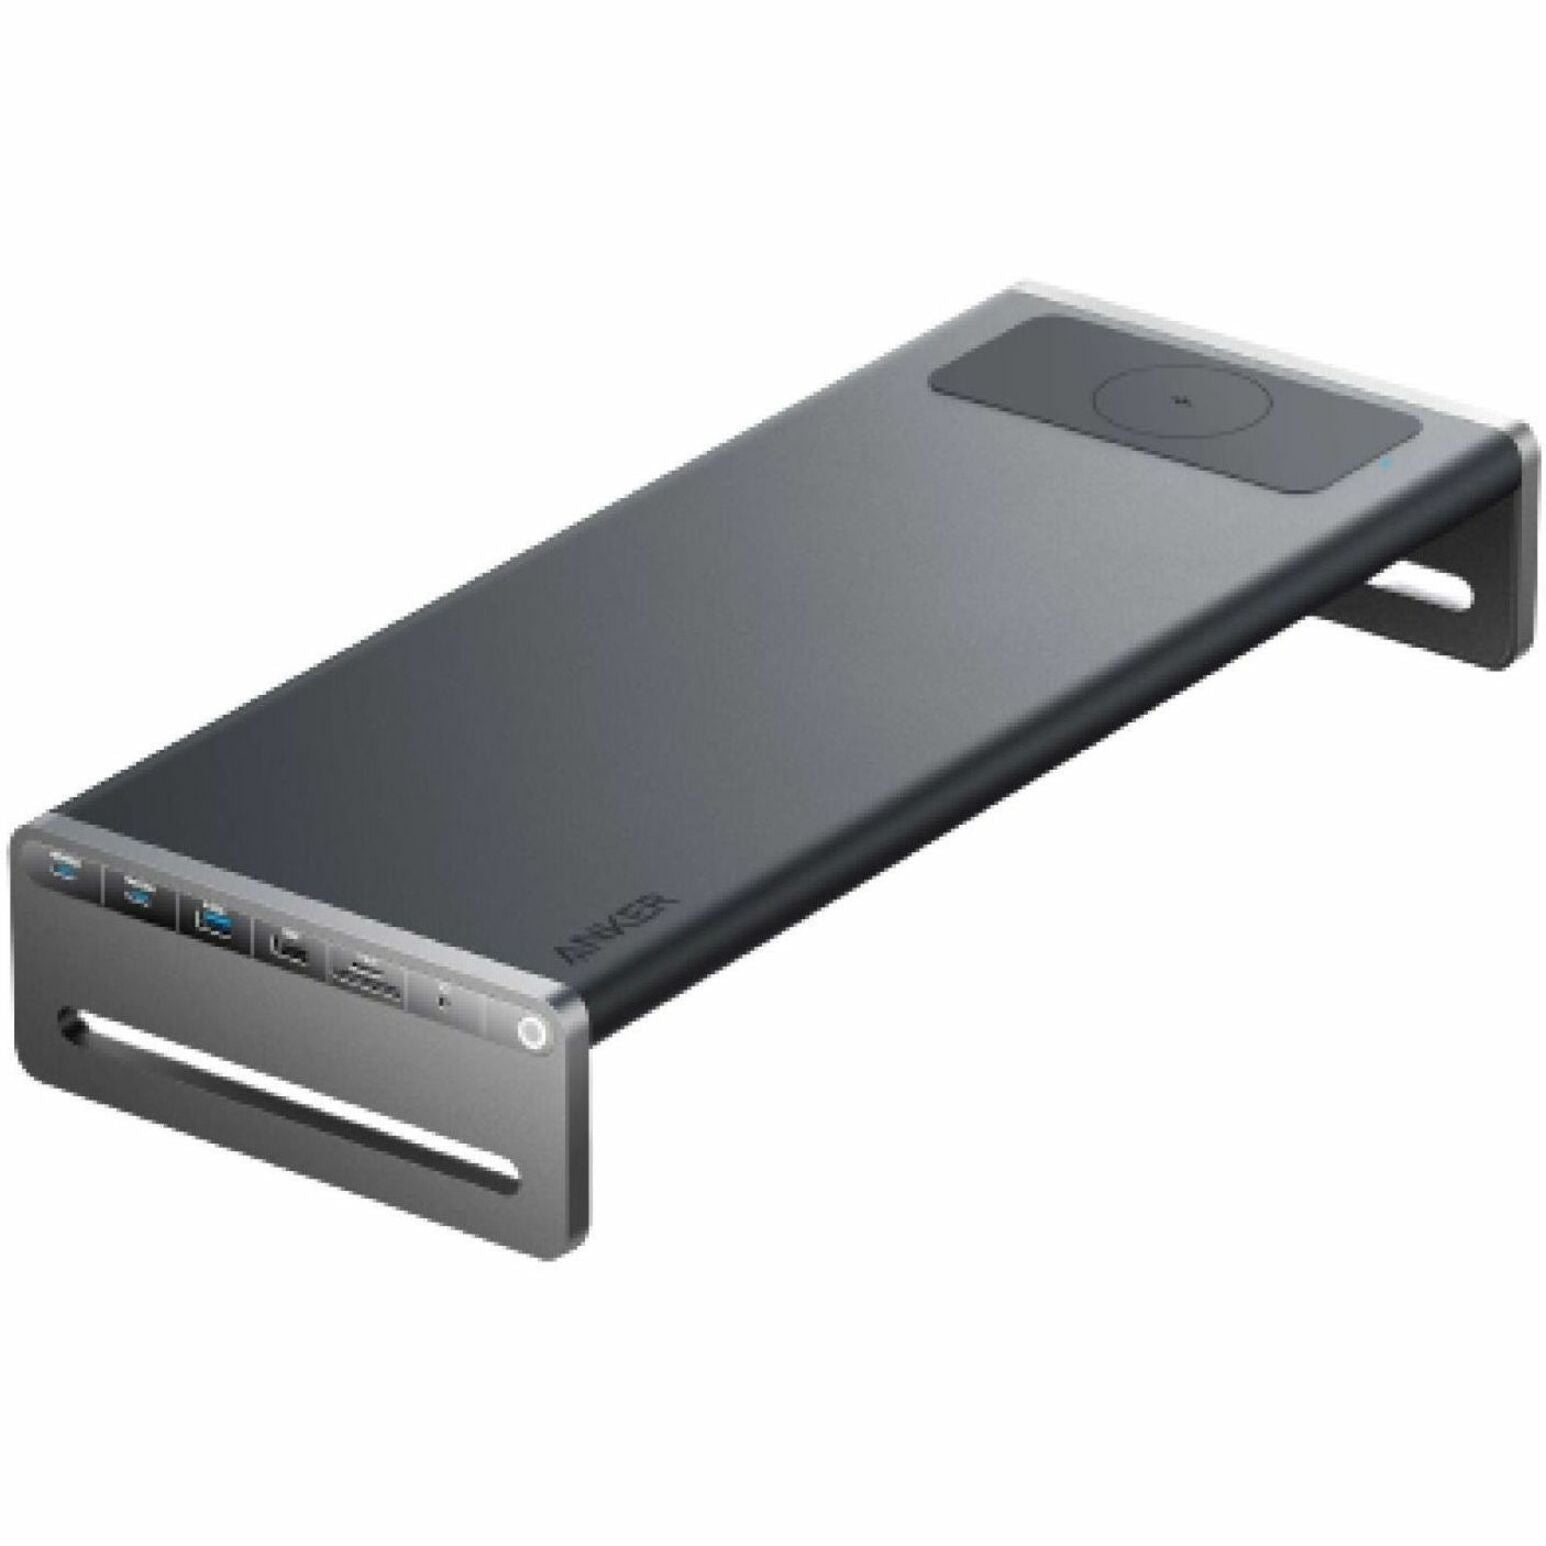 ANKER 675 USB-C Docking Station - 12-in-1, Monitor Stand, Wireless [Discontinued]